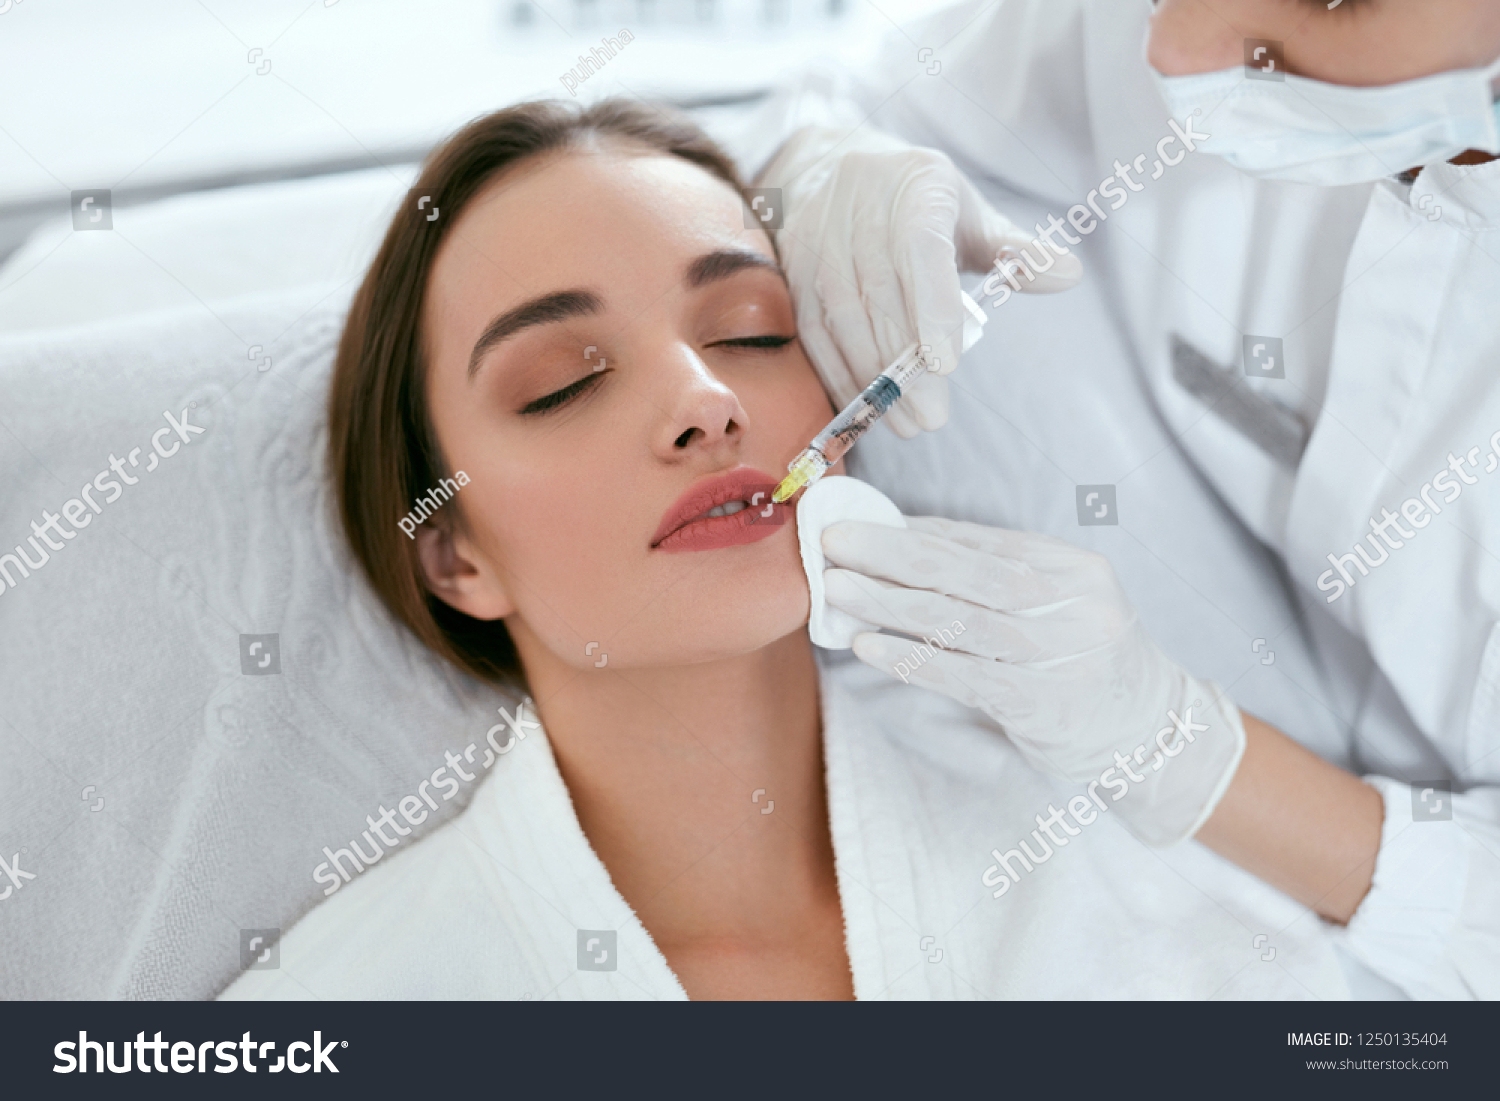 Lip Augmentation. Woman Getting Beauty Injection For Lips #1250135404